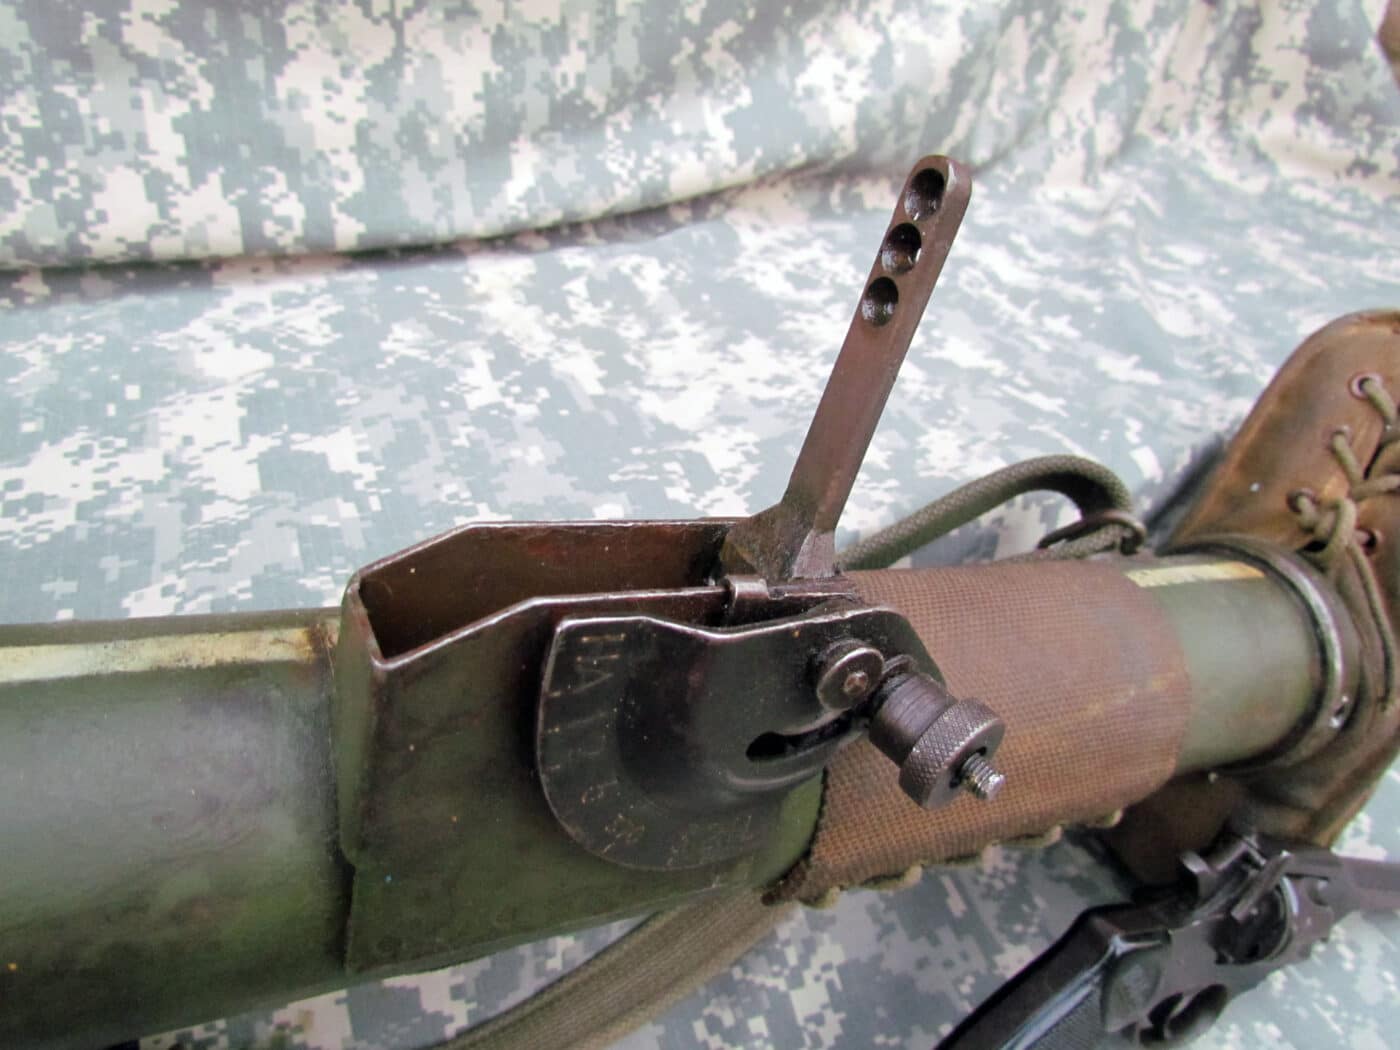 Detail of aperture sight system used on the PIAT guns